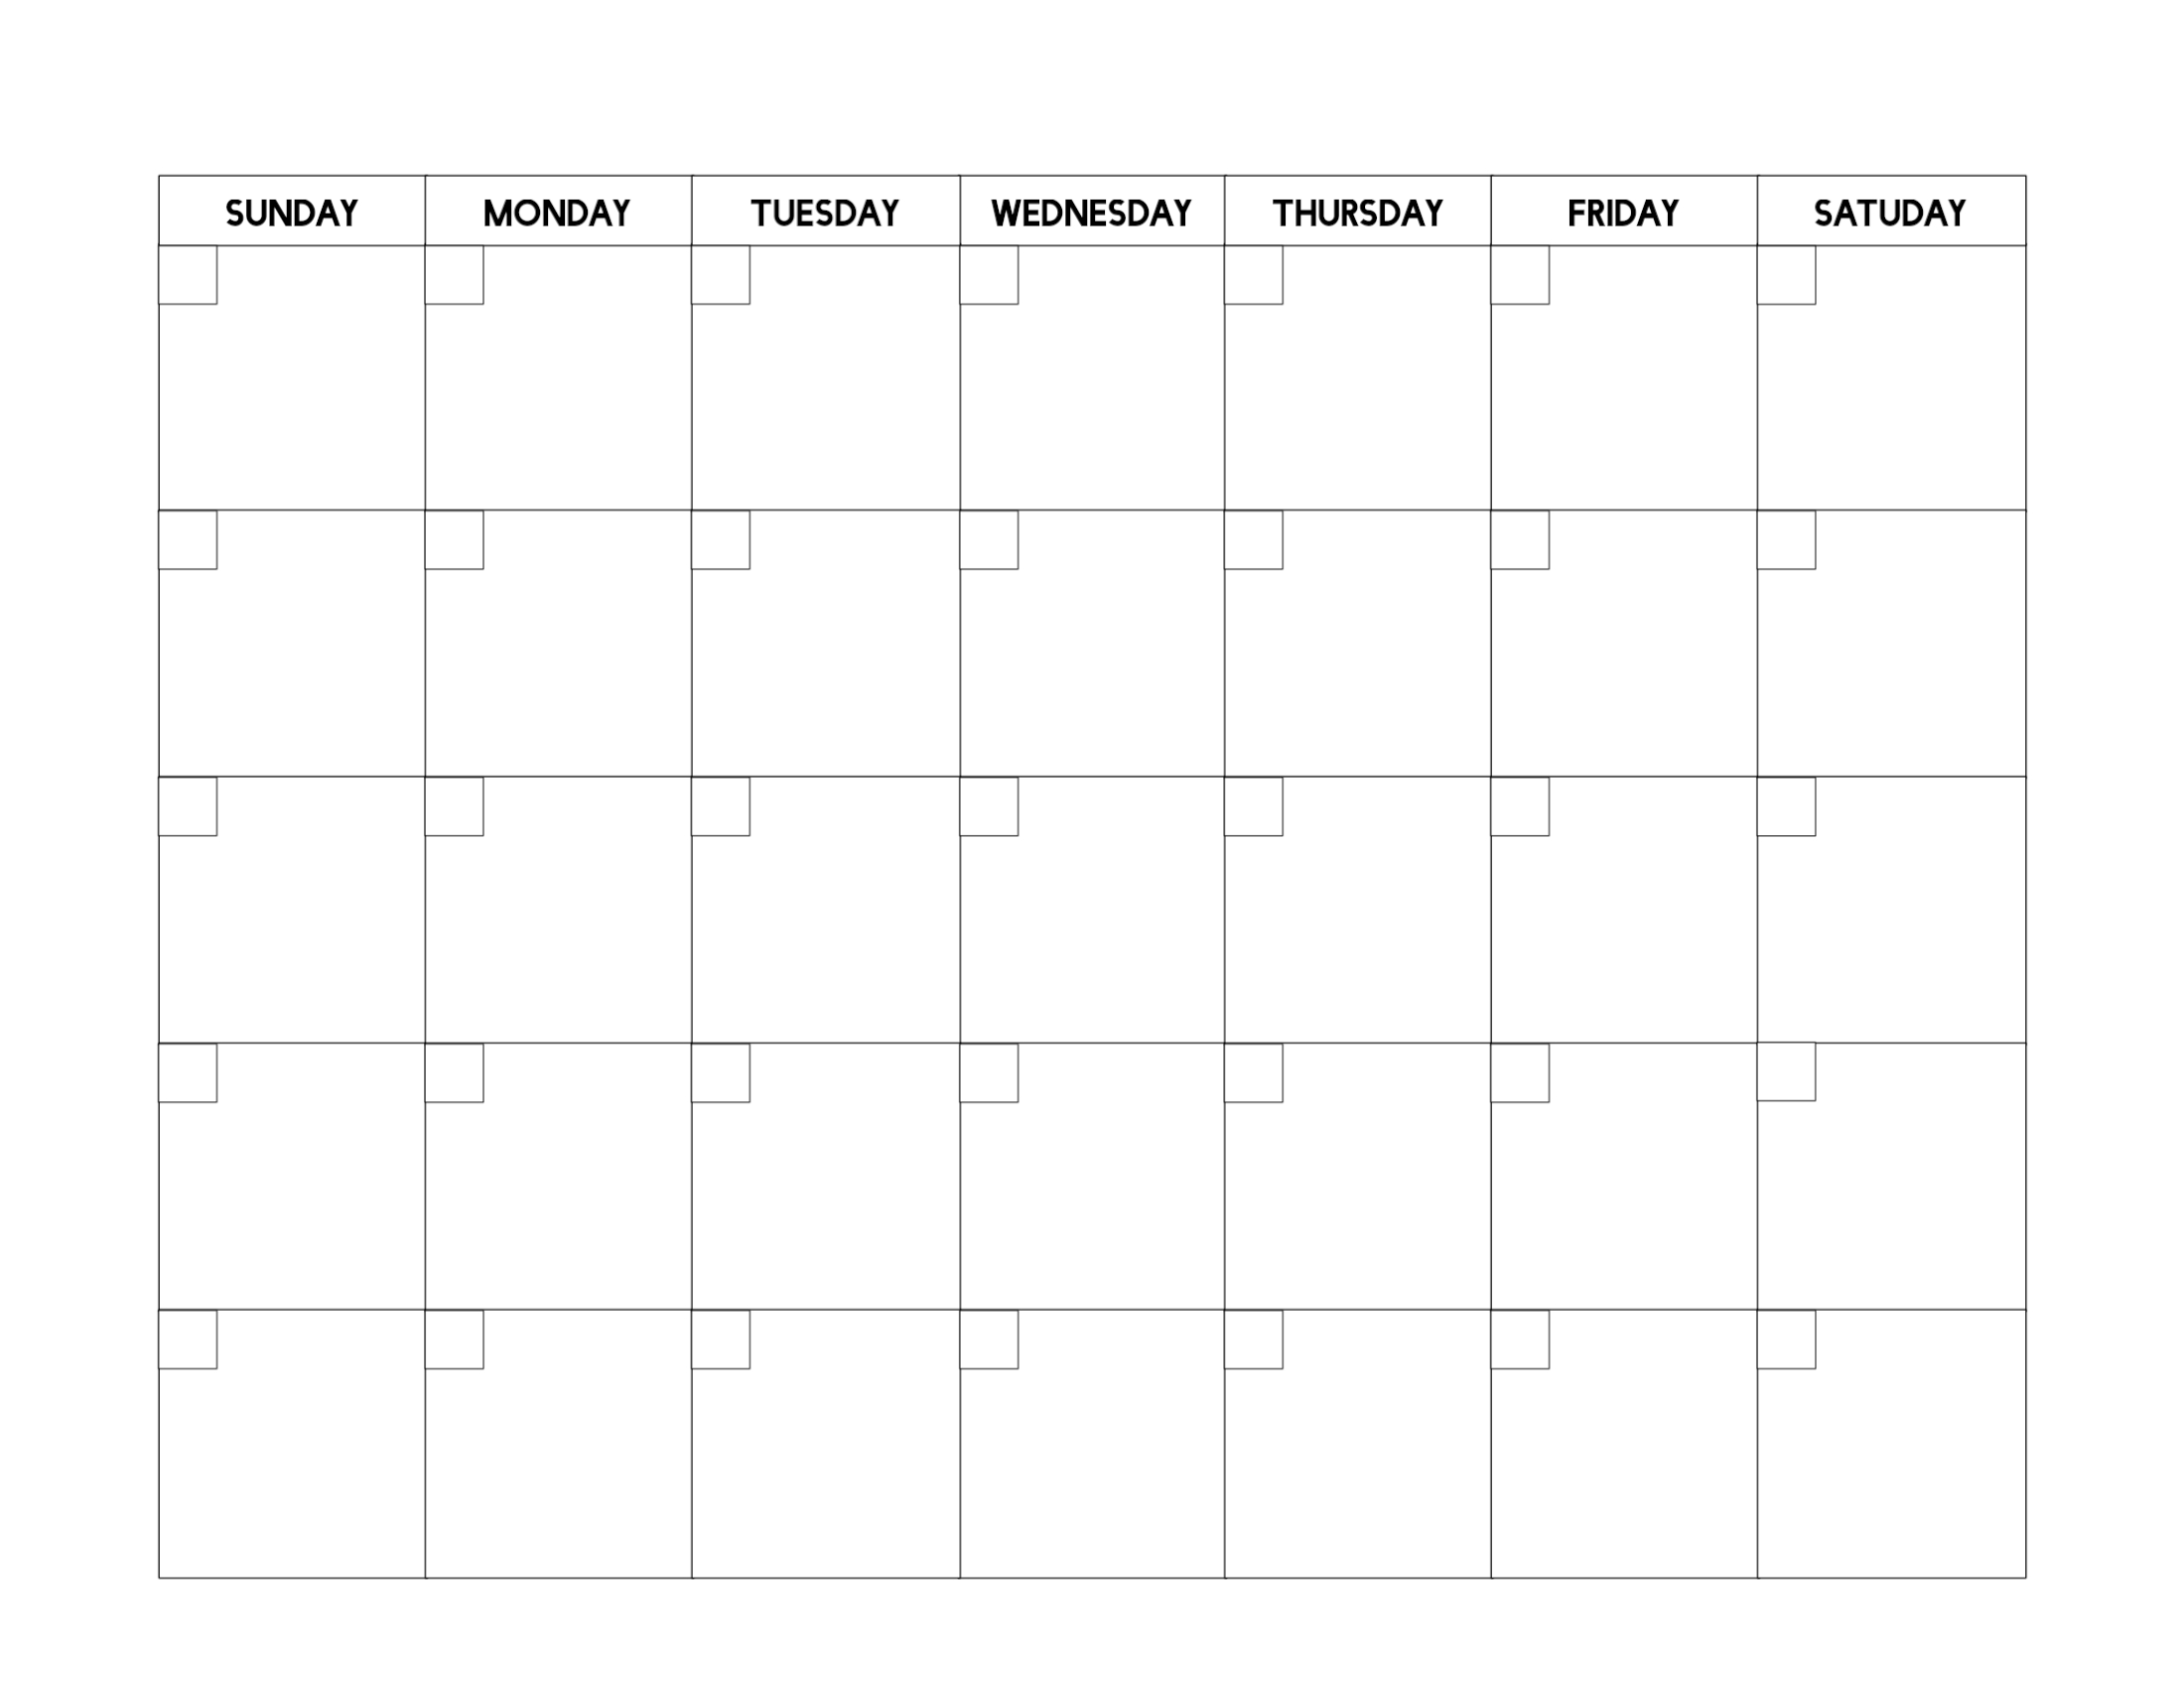 Free Printable Blank Calendar Template - Paper Trail Design Dashing Blank Calenders With No Dates